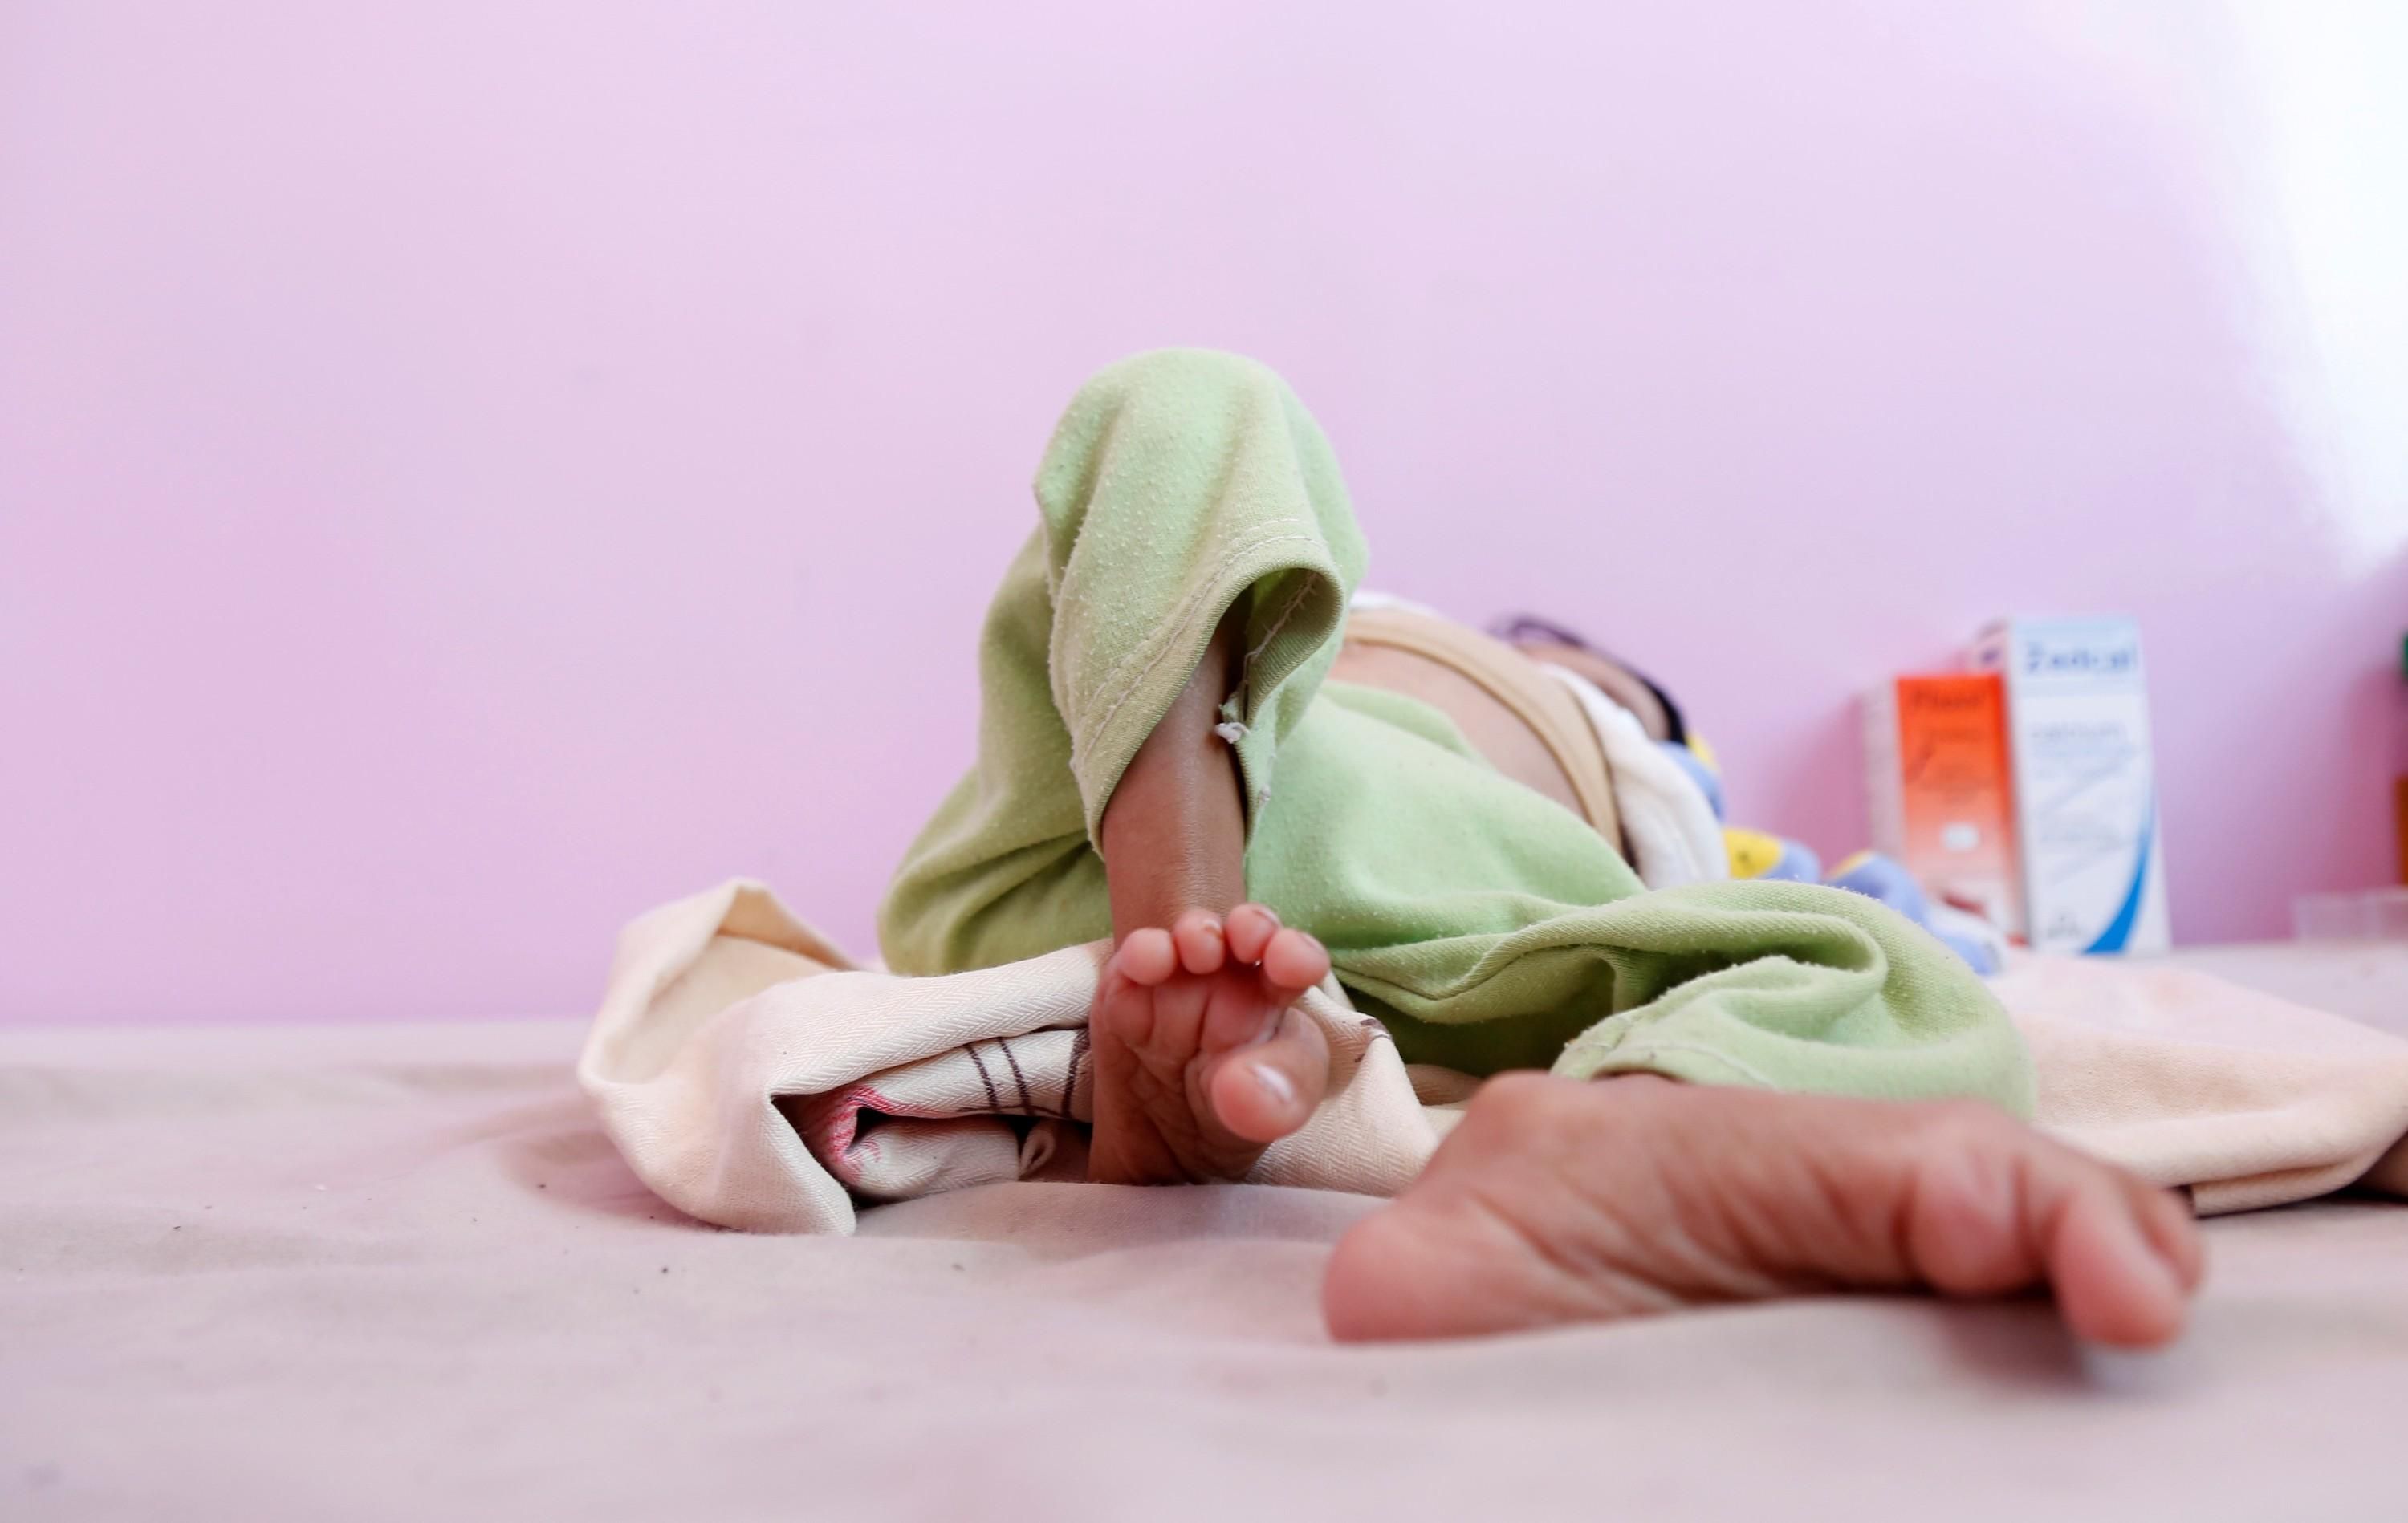 A malnourished child lies on a bed at the malnutrition treating ward in a hospital in Sanaa, Yemen, March 13, 2022.